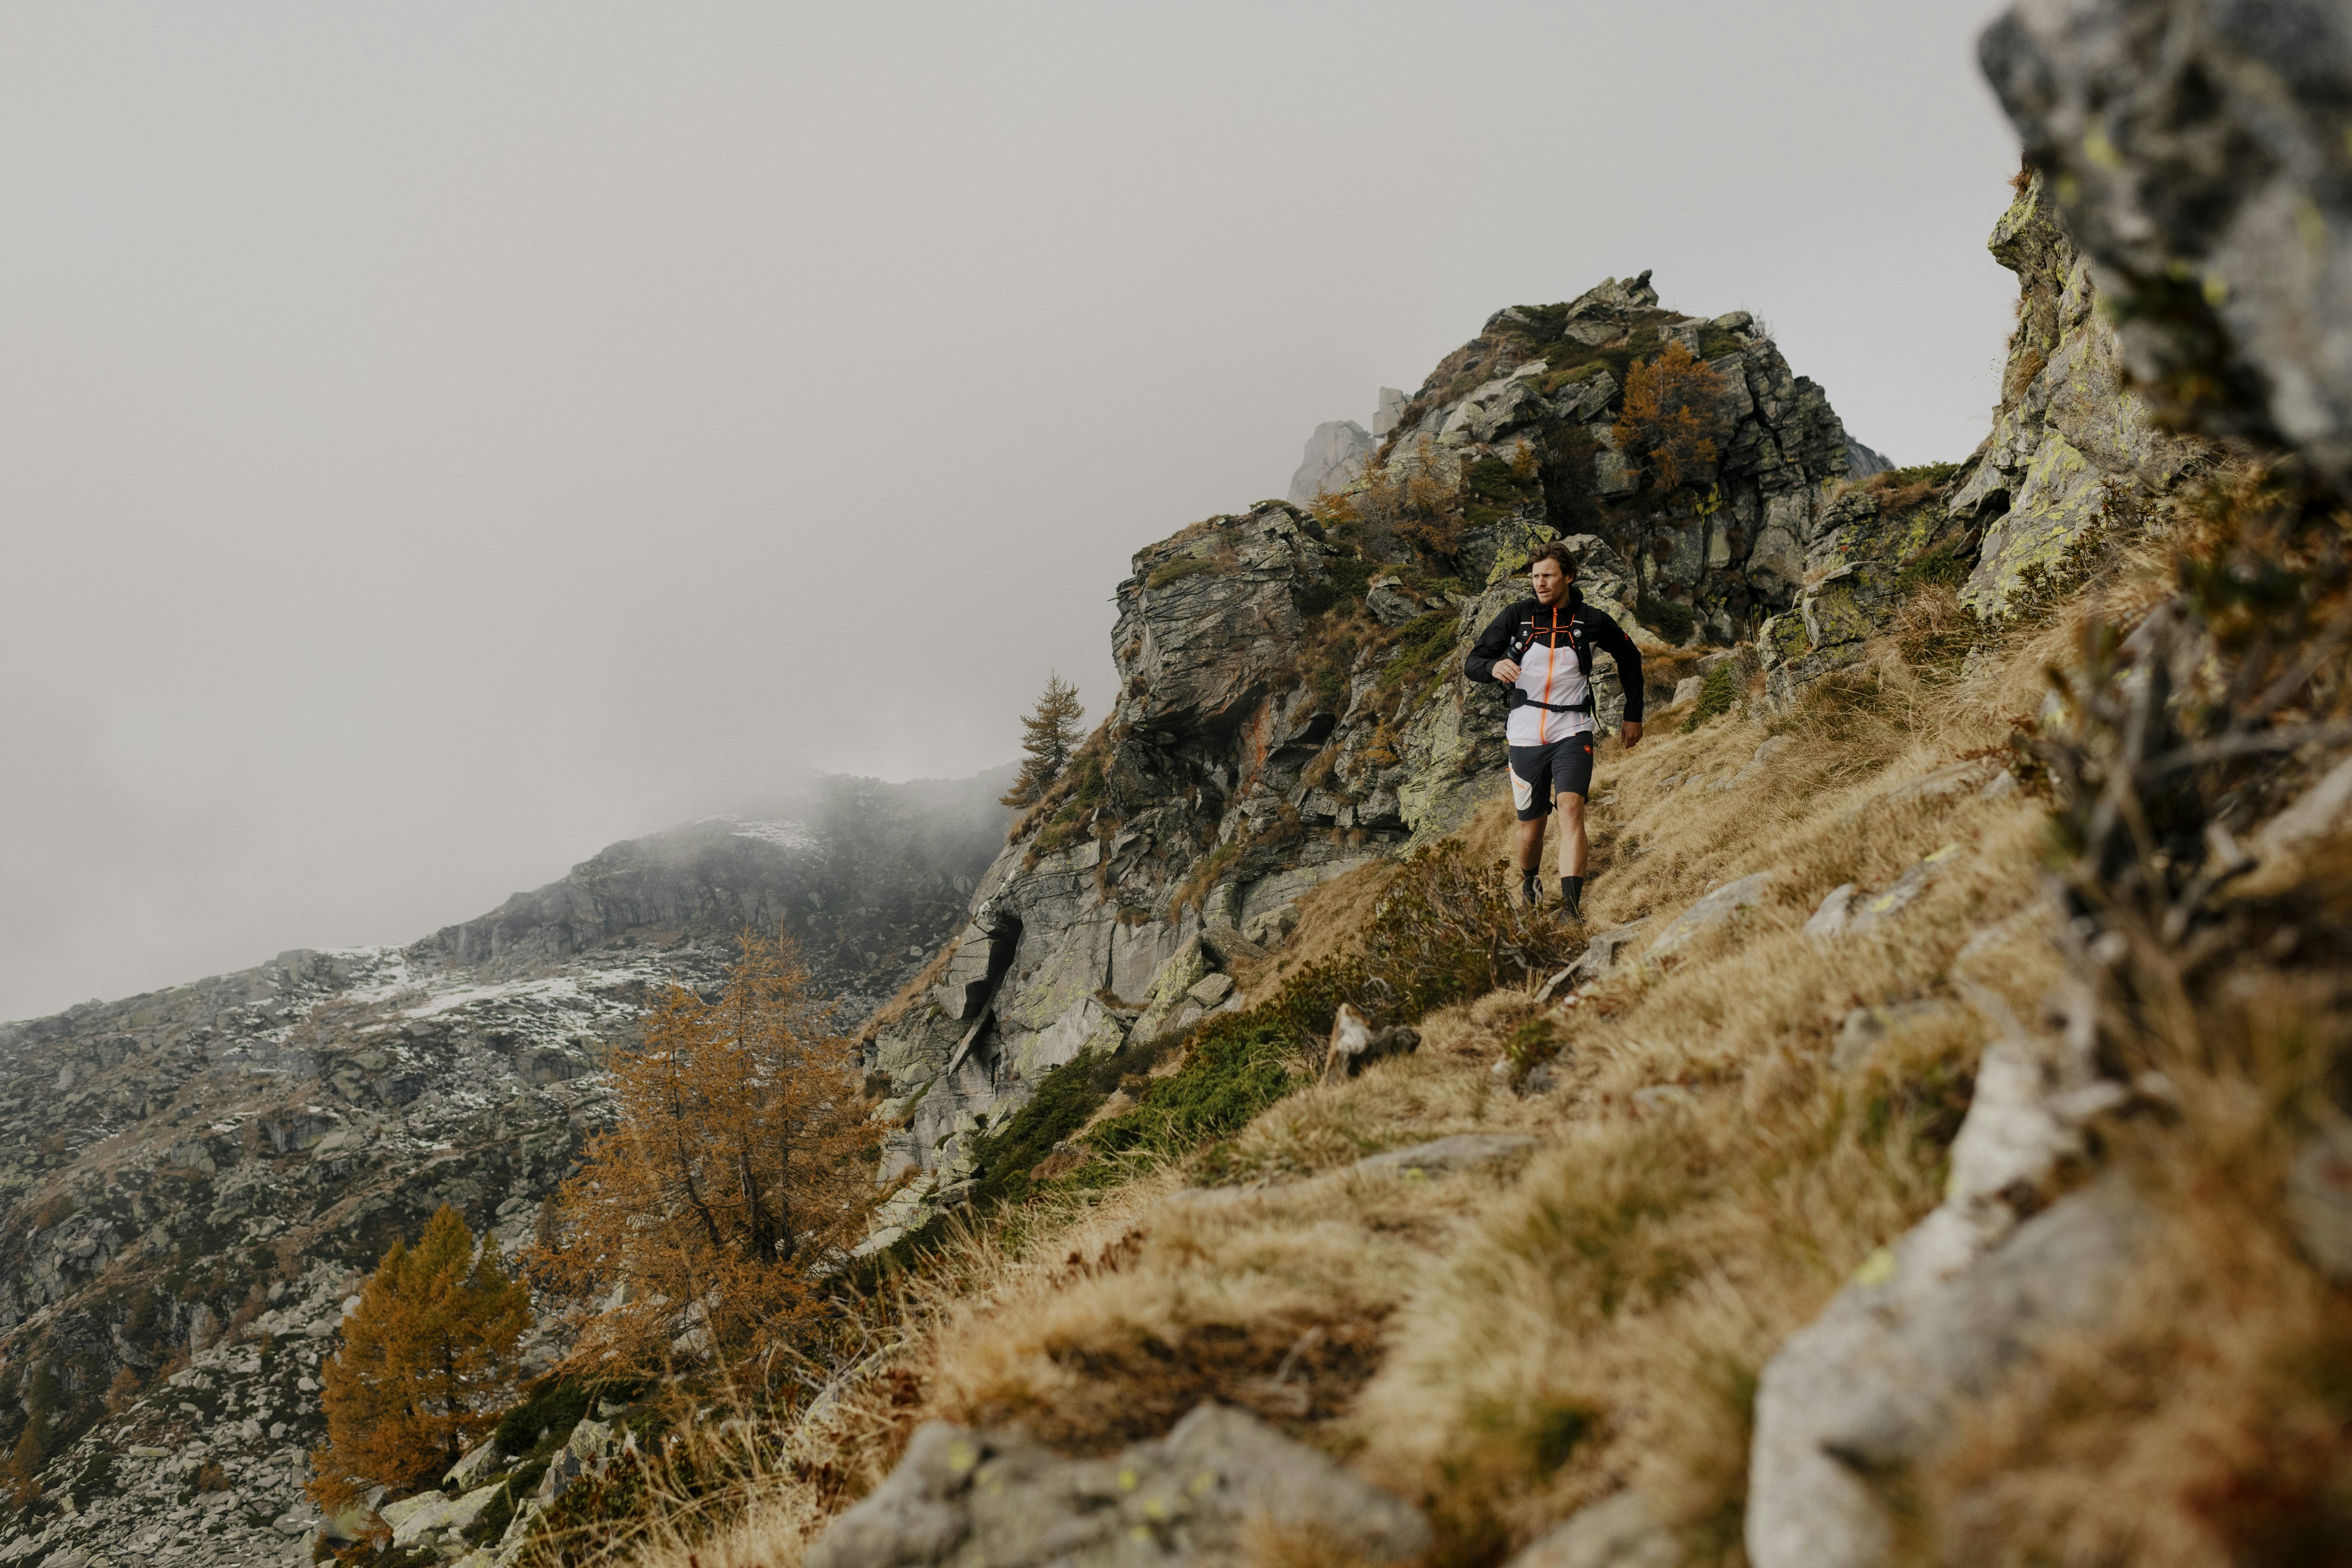 Man running in the mountains